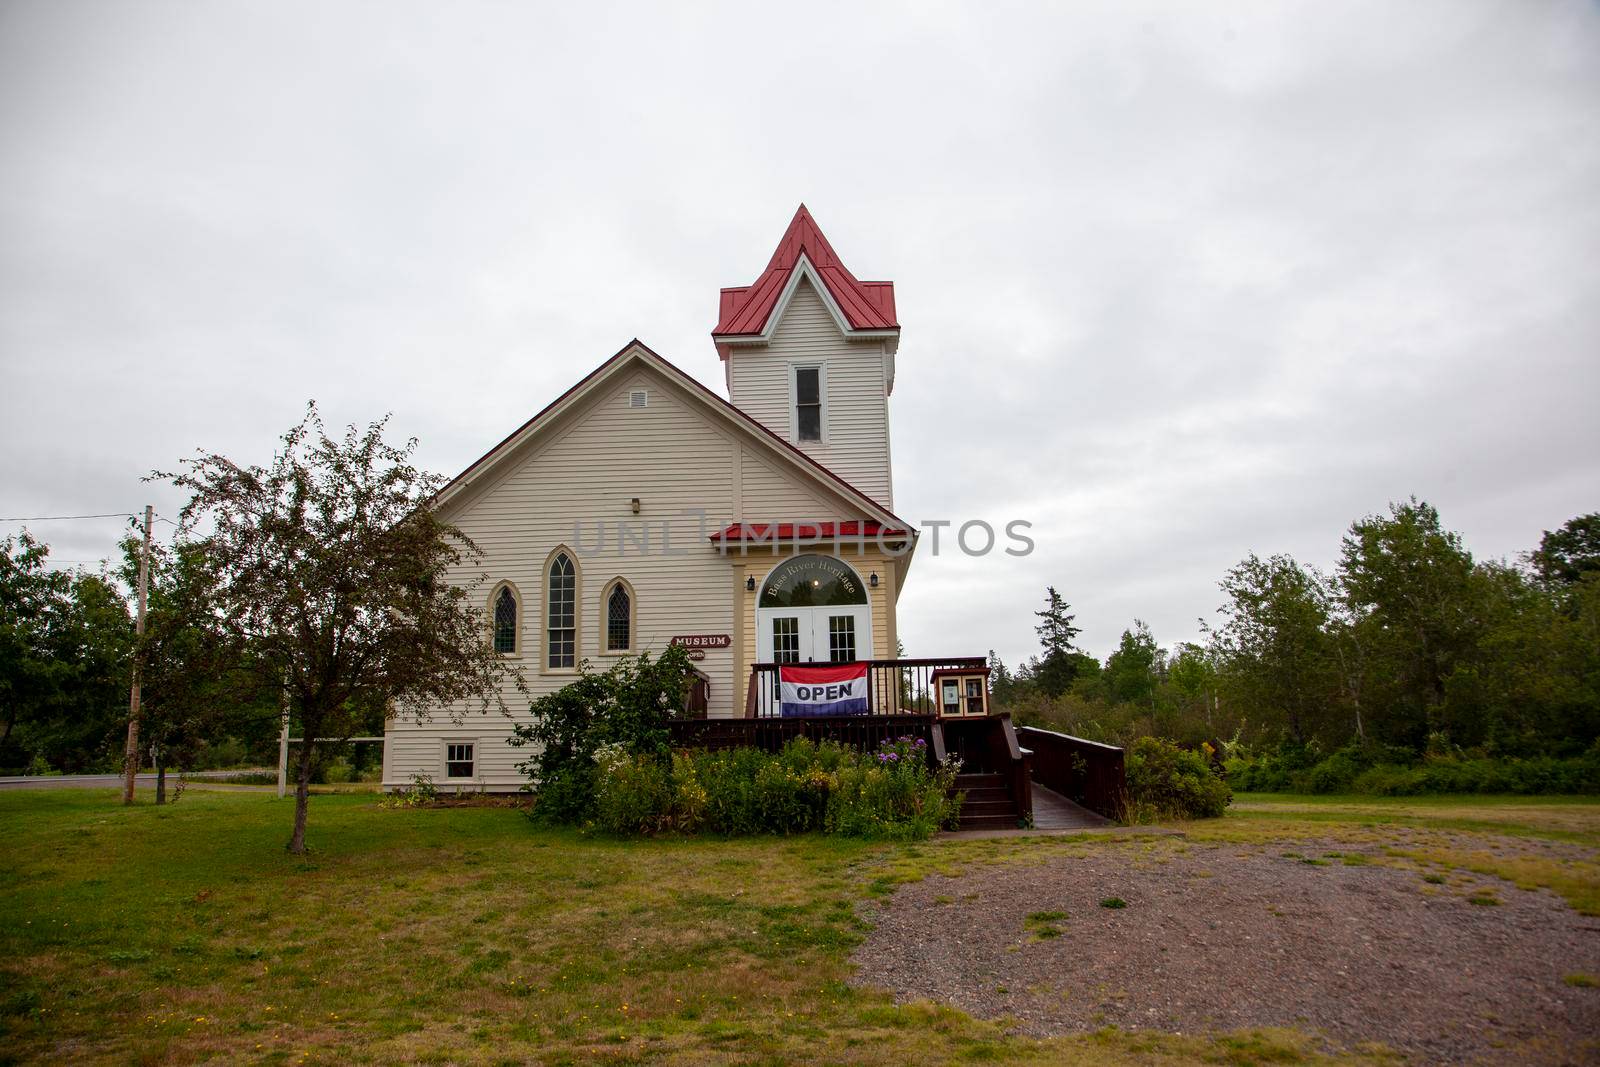 august 18, 2019 - bass river, nova scotia - the historic town of bass river has a heritage society museum 